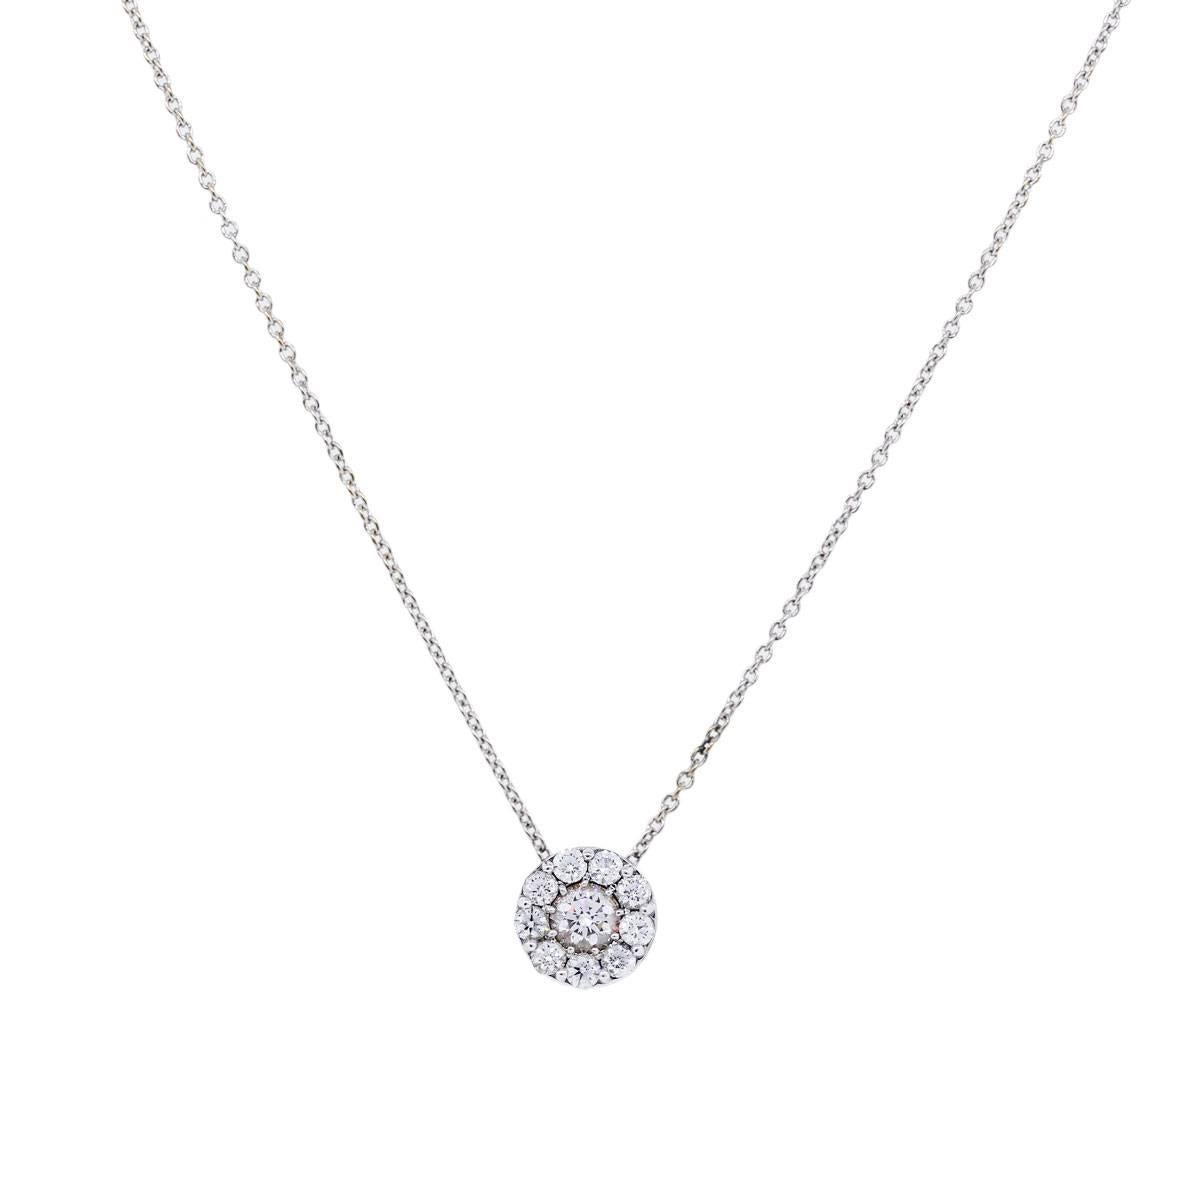 Designer: Hearts on Fire
Material: 18k white gold
Diamond Details: 1.50ctw of round brilliant diamonds. Diamonds are I in color and SI2 in clarity
Necklace Measurements: 19